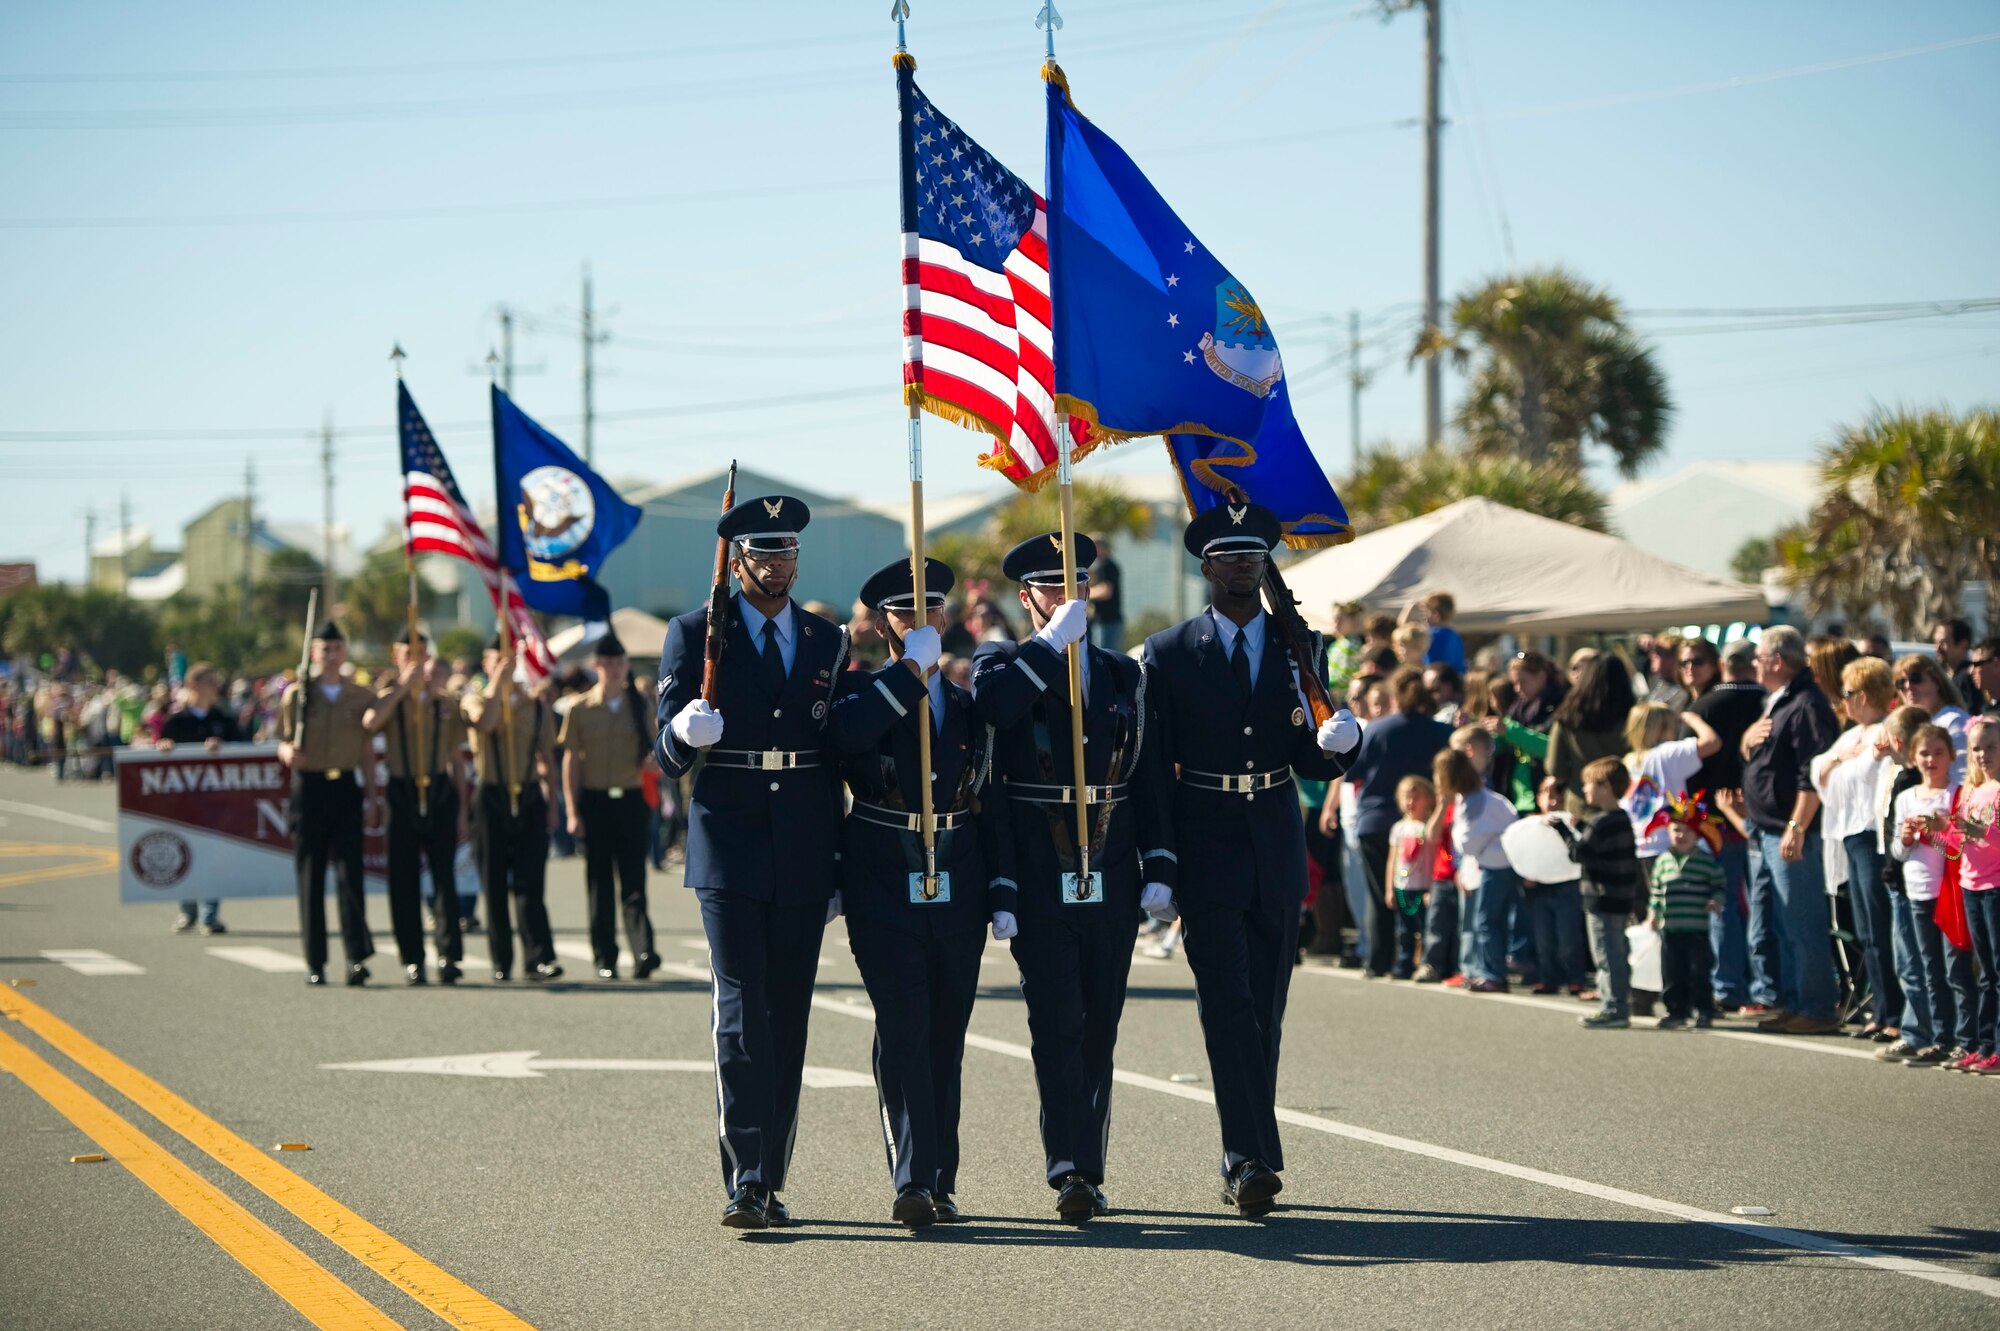 Honor Guardsmen from the 1st Special Operations Wing carry the colors during a mardi gras parade at Navarre Beach, Fla., Feb. 2, 2013. The 1st SOW also participated in the parade with a High Mobility Multipurpose Wheeled Vehicle. (U.S. Air Force photo / Tech. Sgt. Vanessa Valentine)